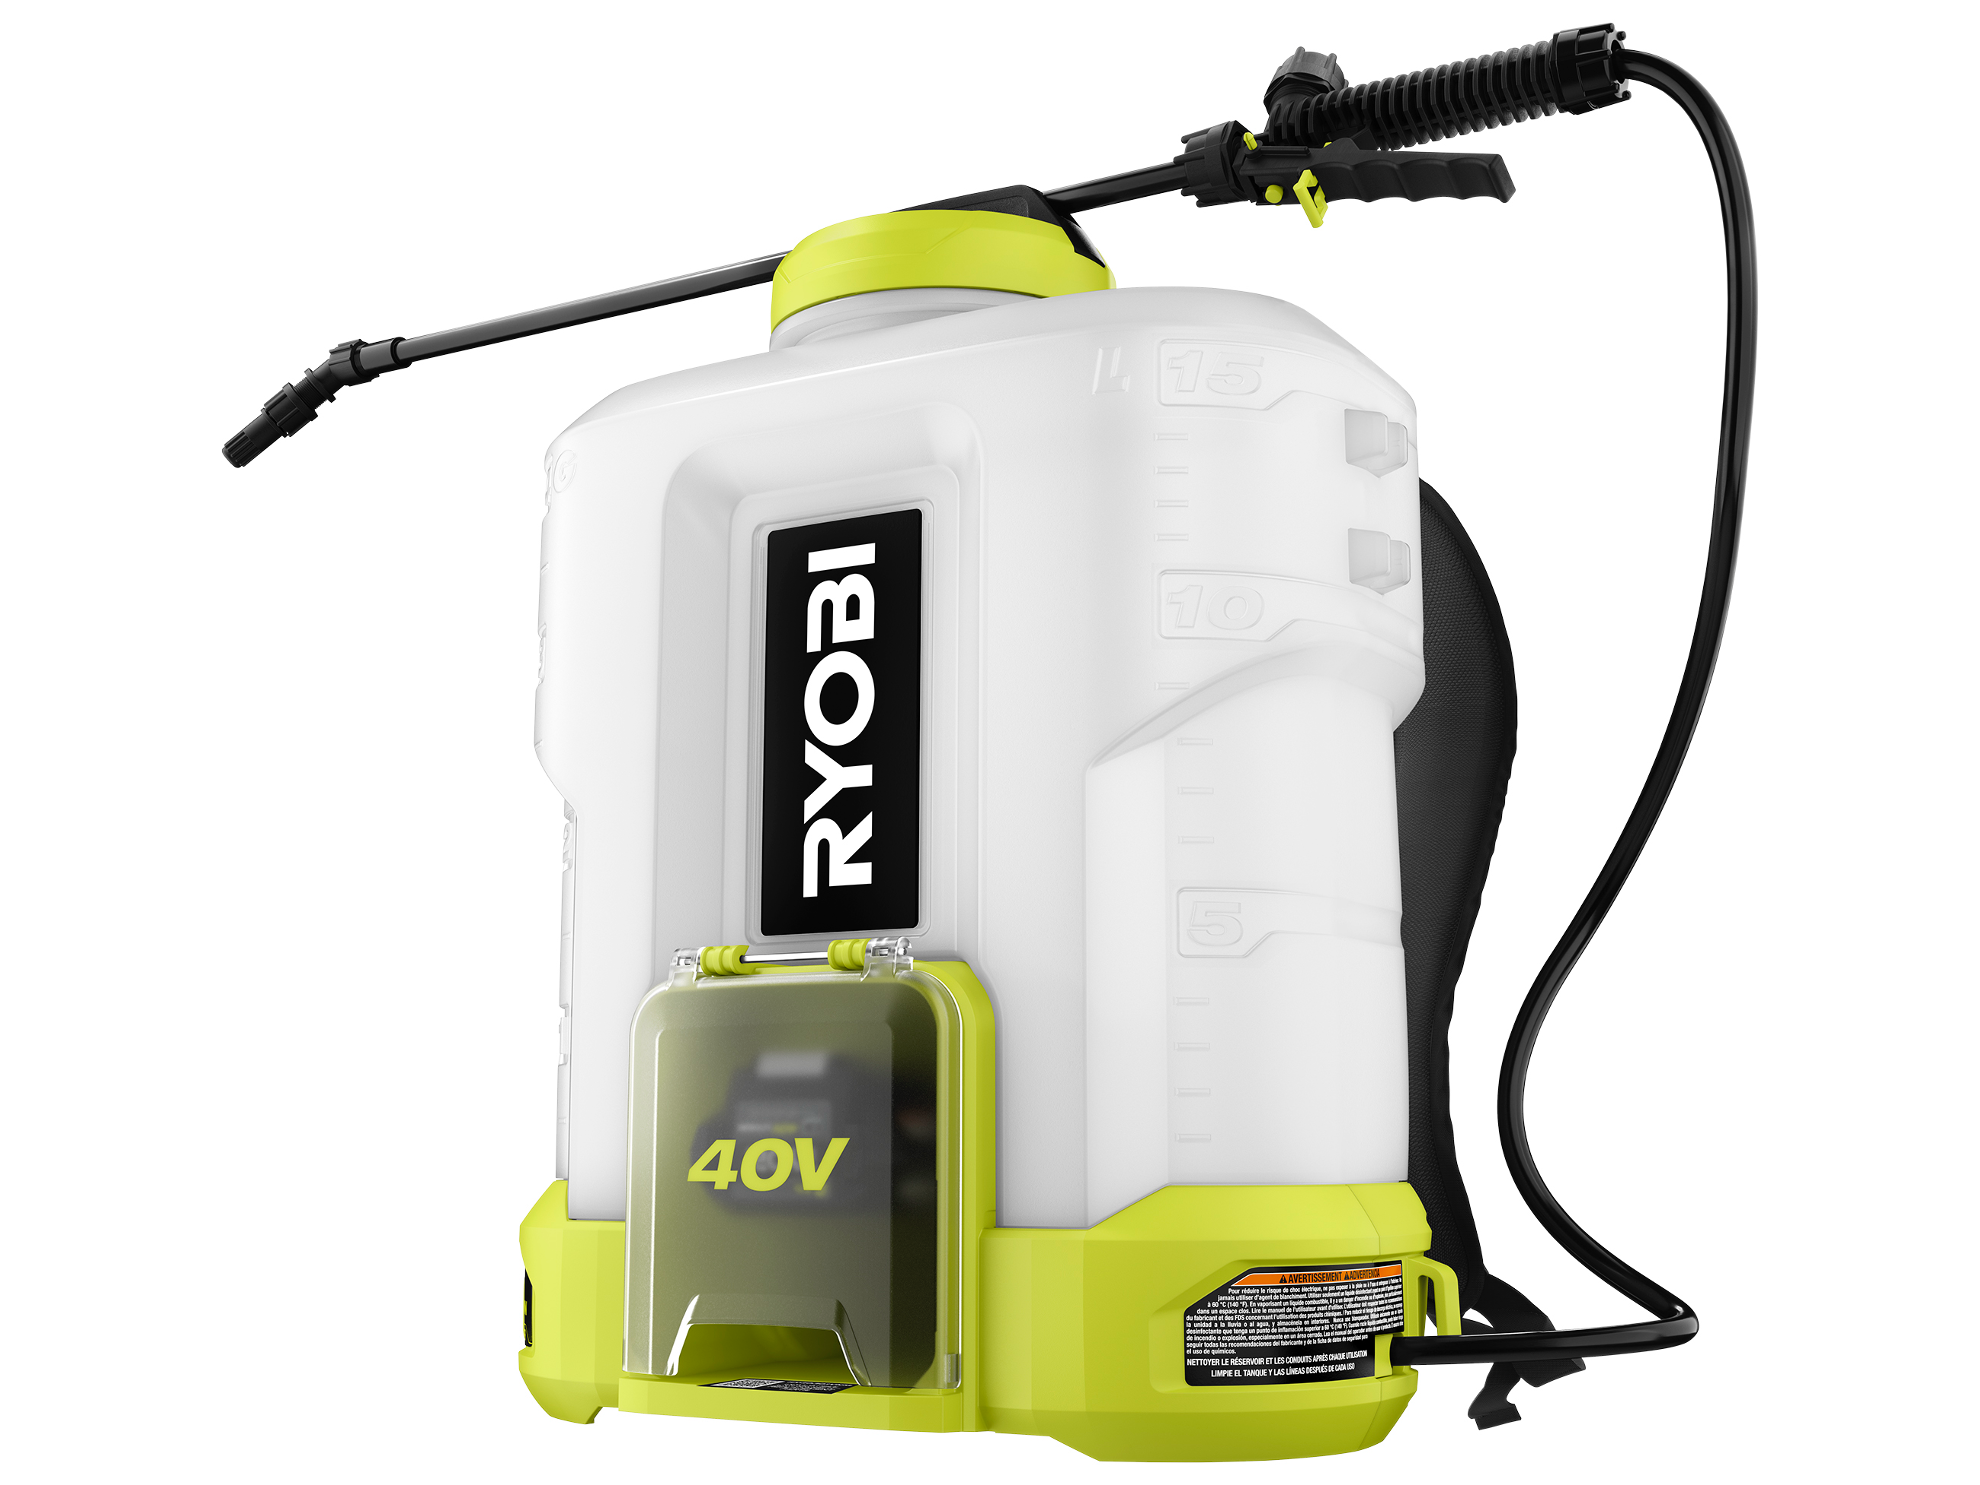 Product Features Image for 40V 4 GALLON BACKPACK CHEMICAL SPRAYER.